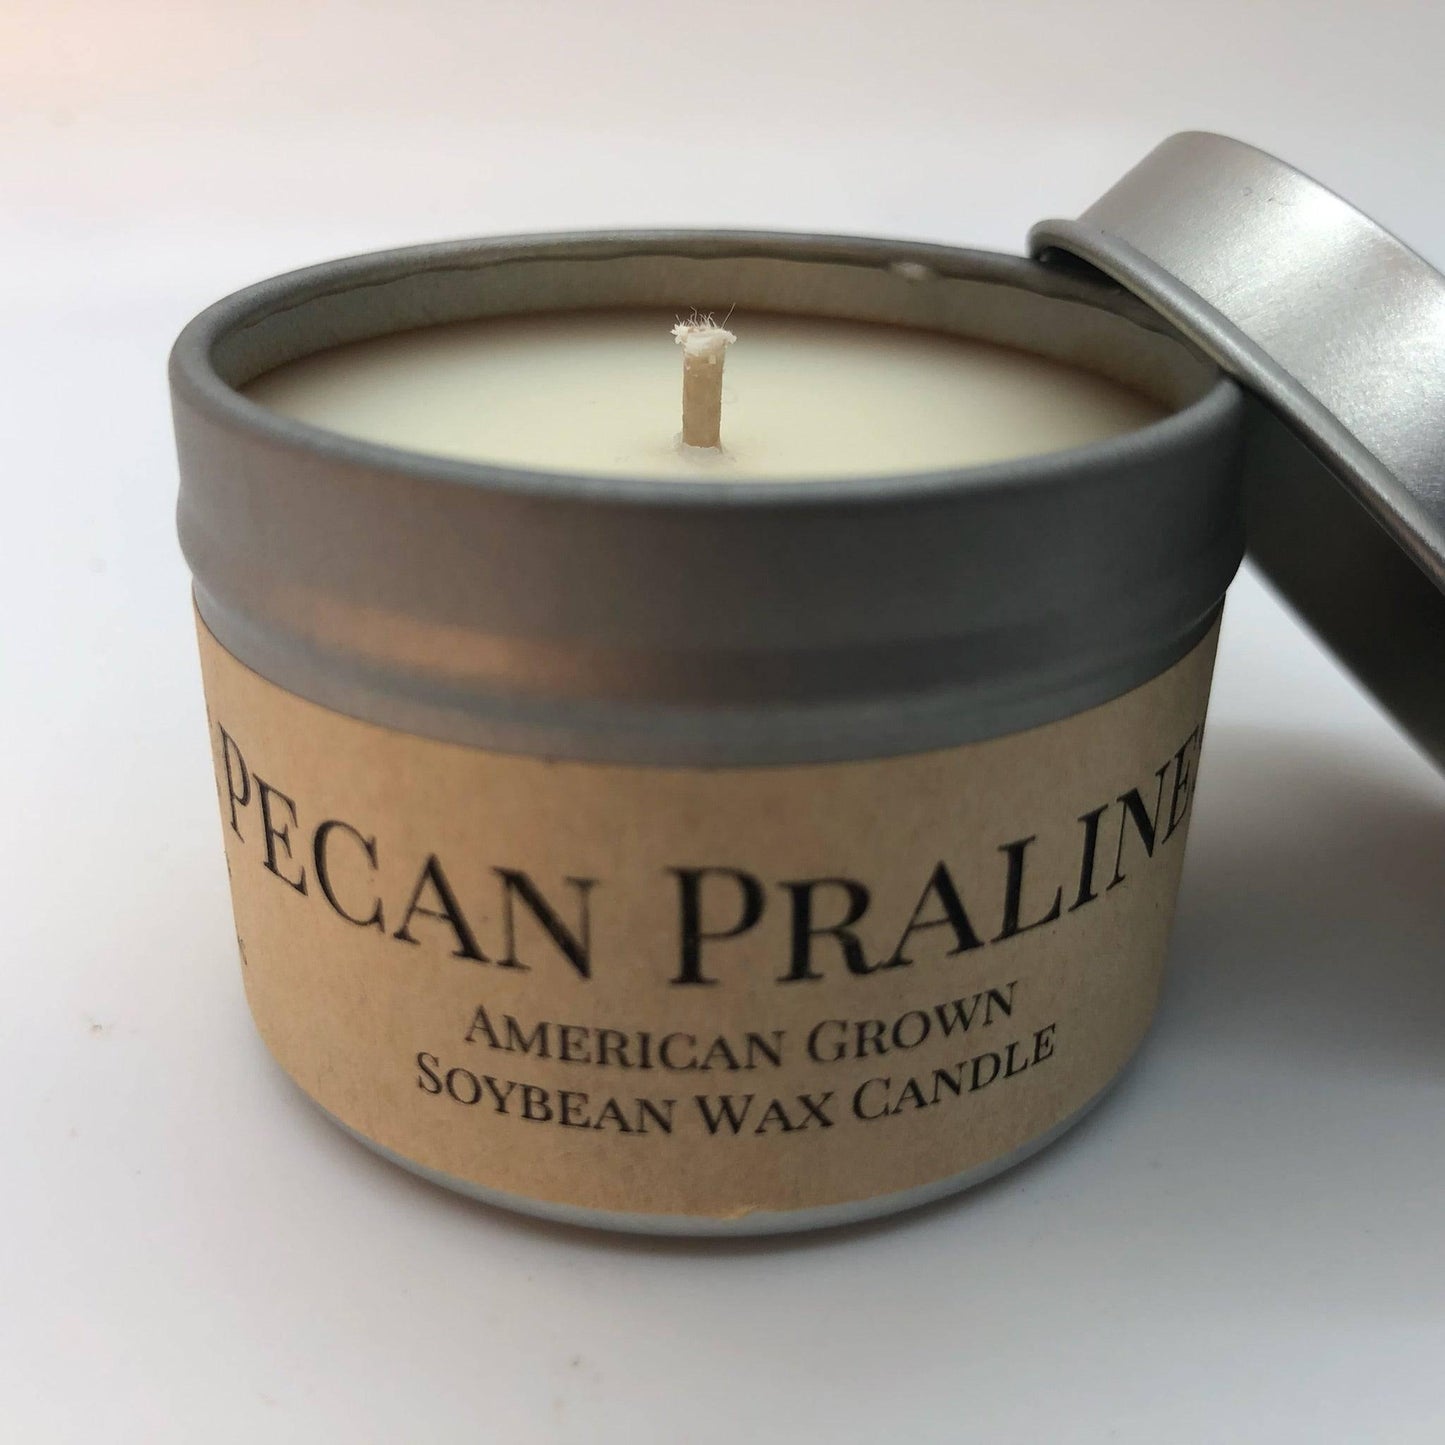 Pecan Pralines Soy Wax Candle | 2 oz Travel Tin - Prairie Fire Candles